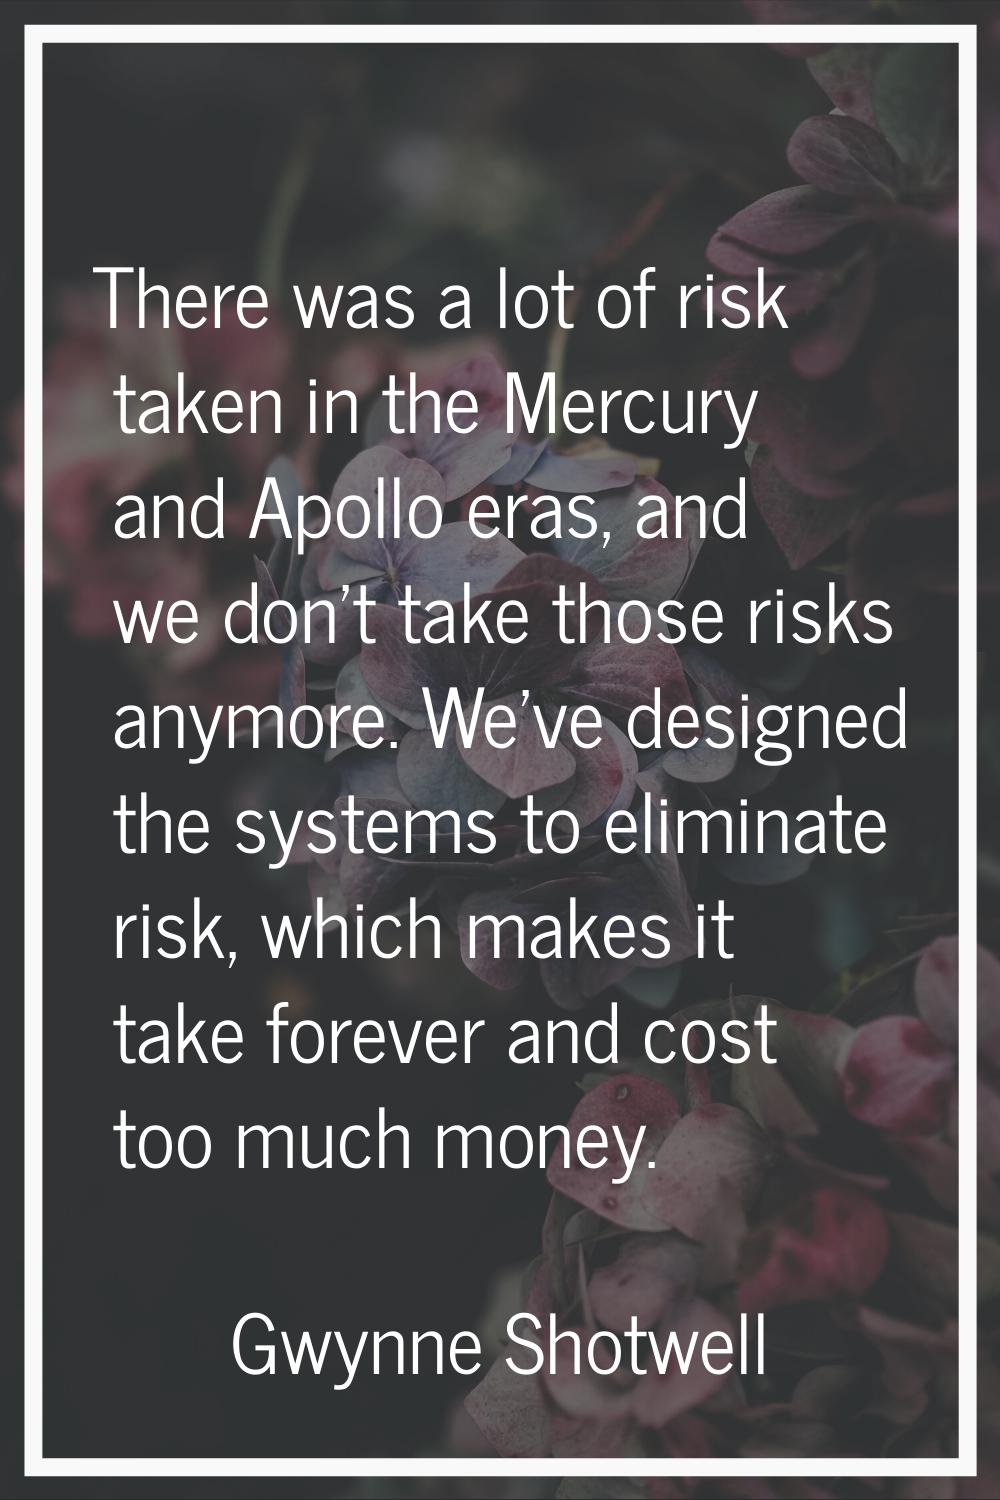 There was a lot of risk taken in the Mercury and Apollo eras, and we don't take those risks anymore